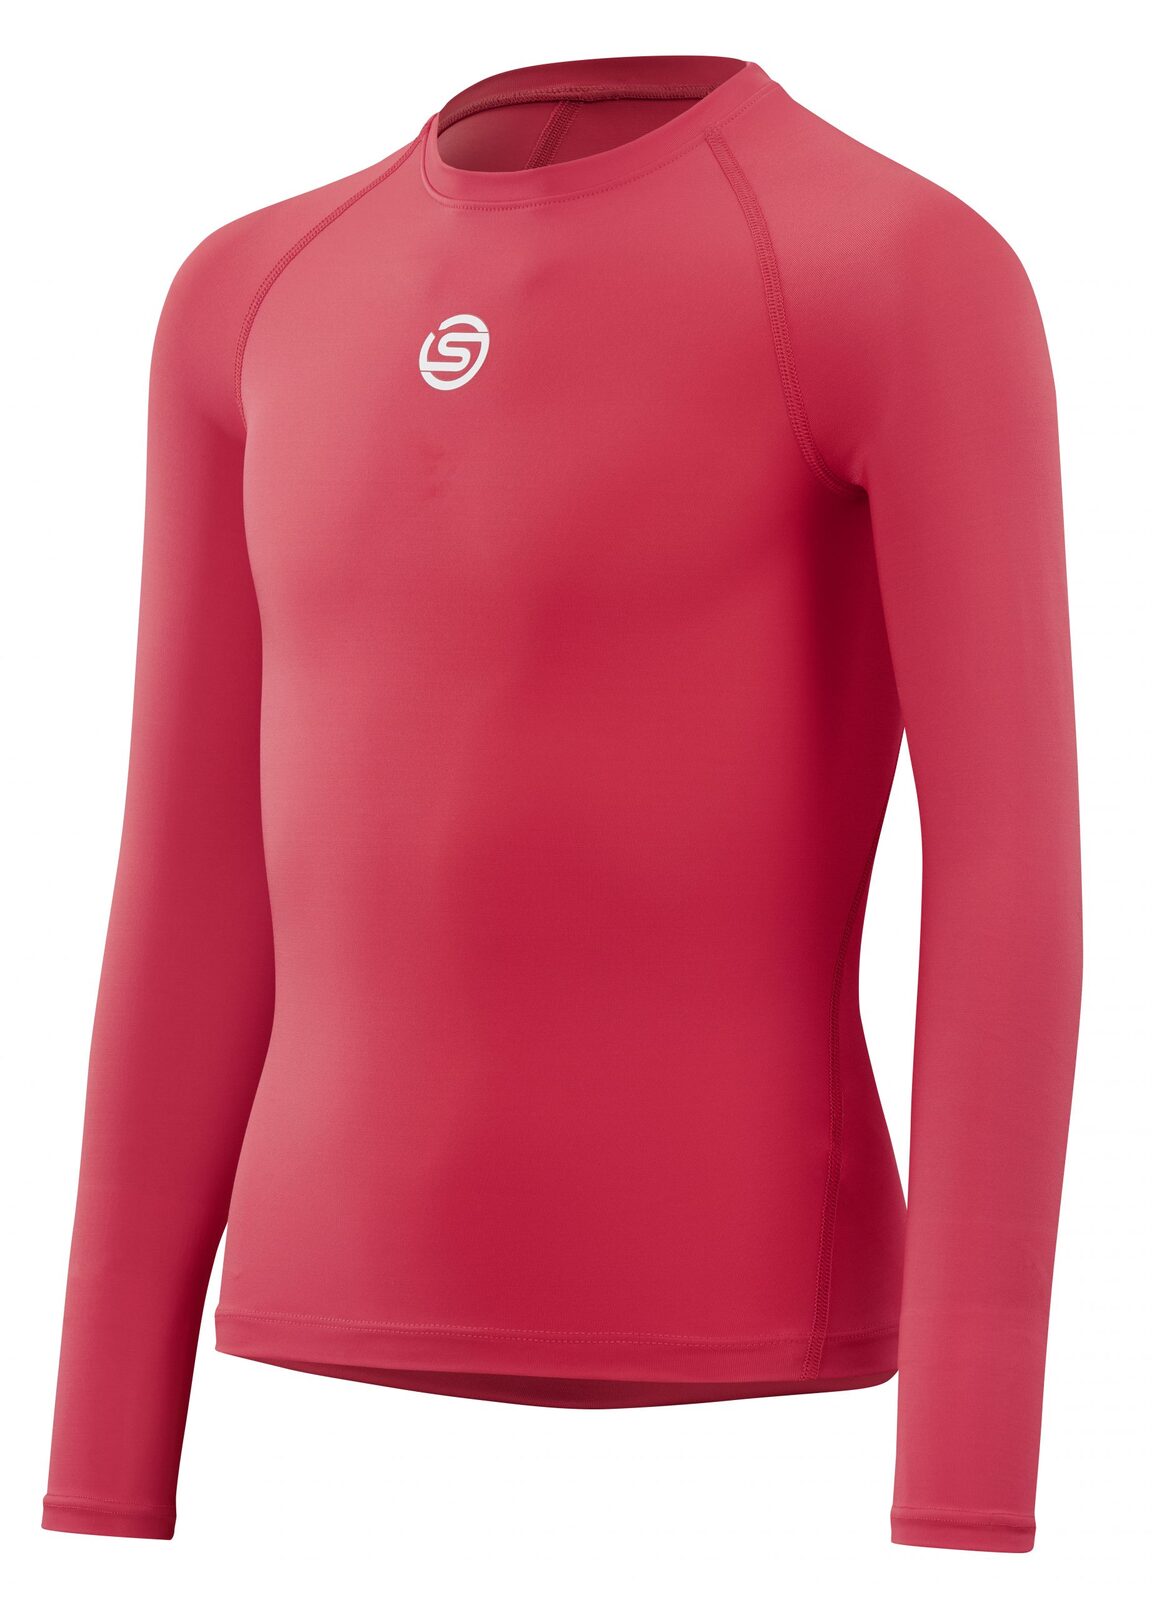 SKINS SERIES-1 Youth Long Sleeve Top Red